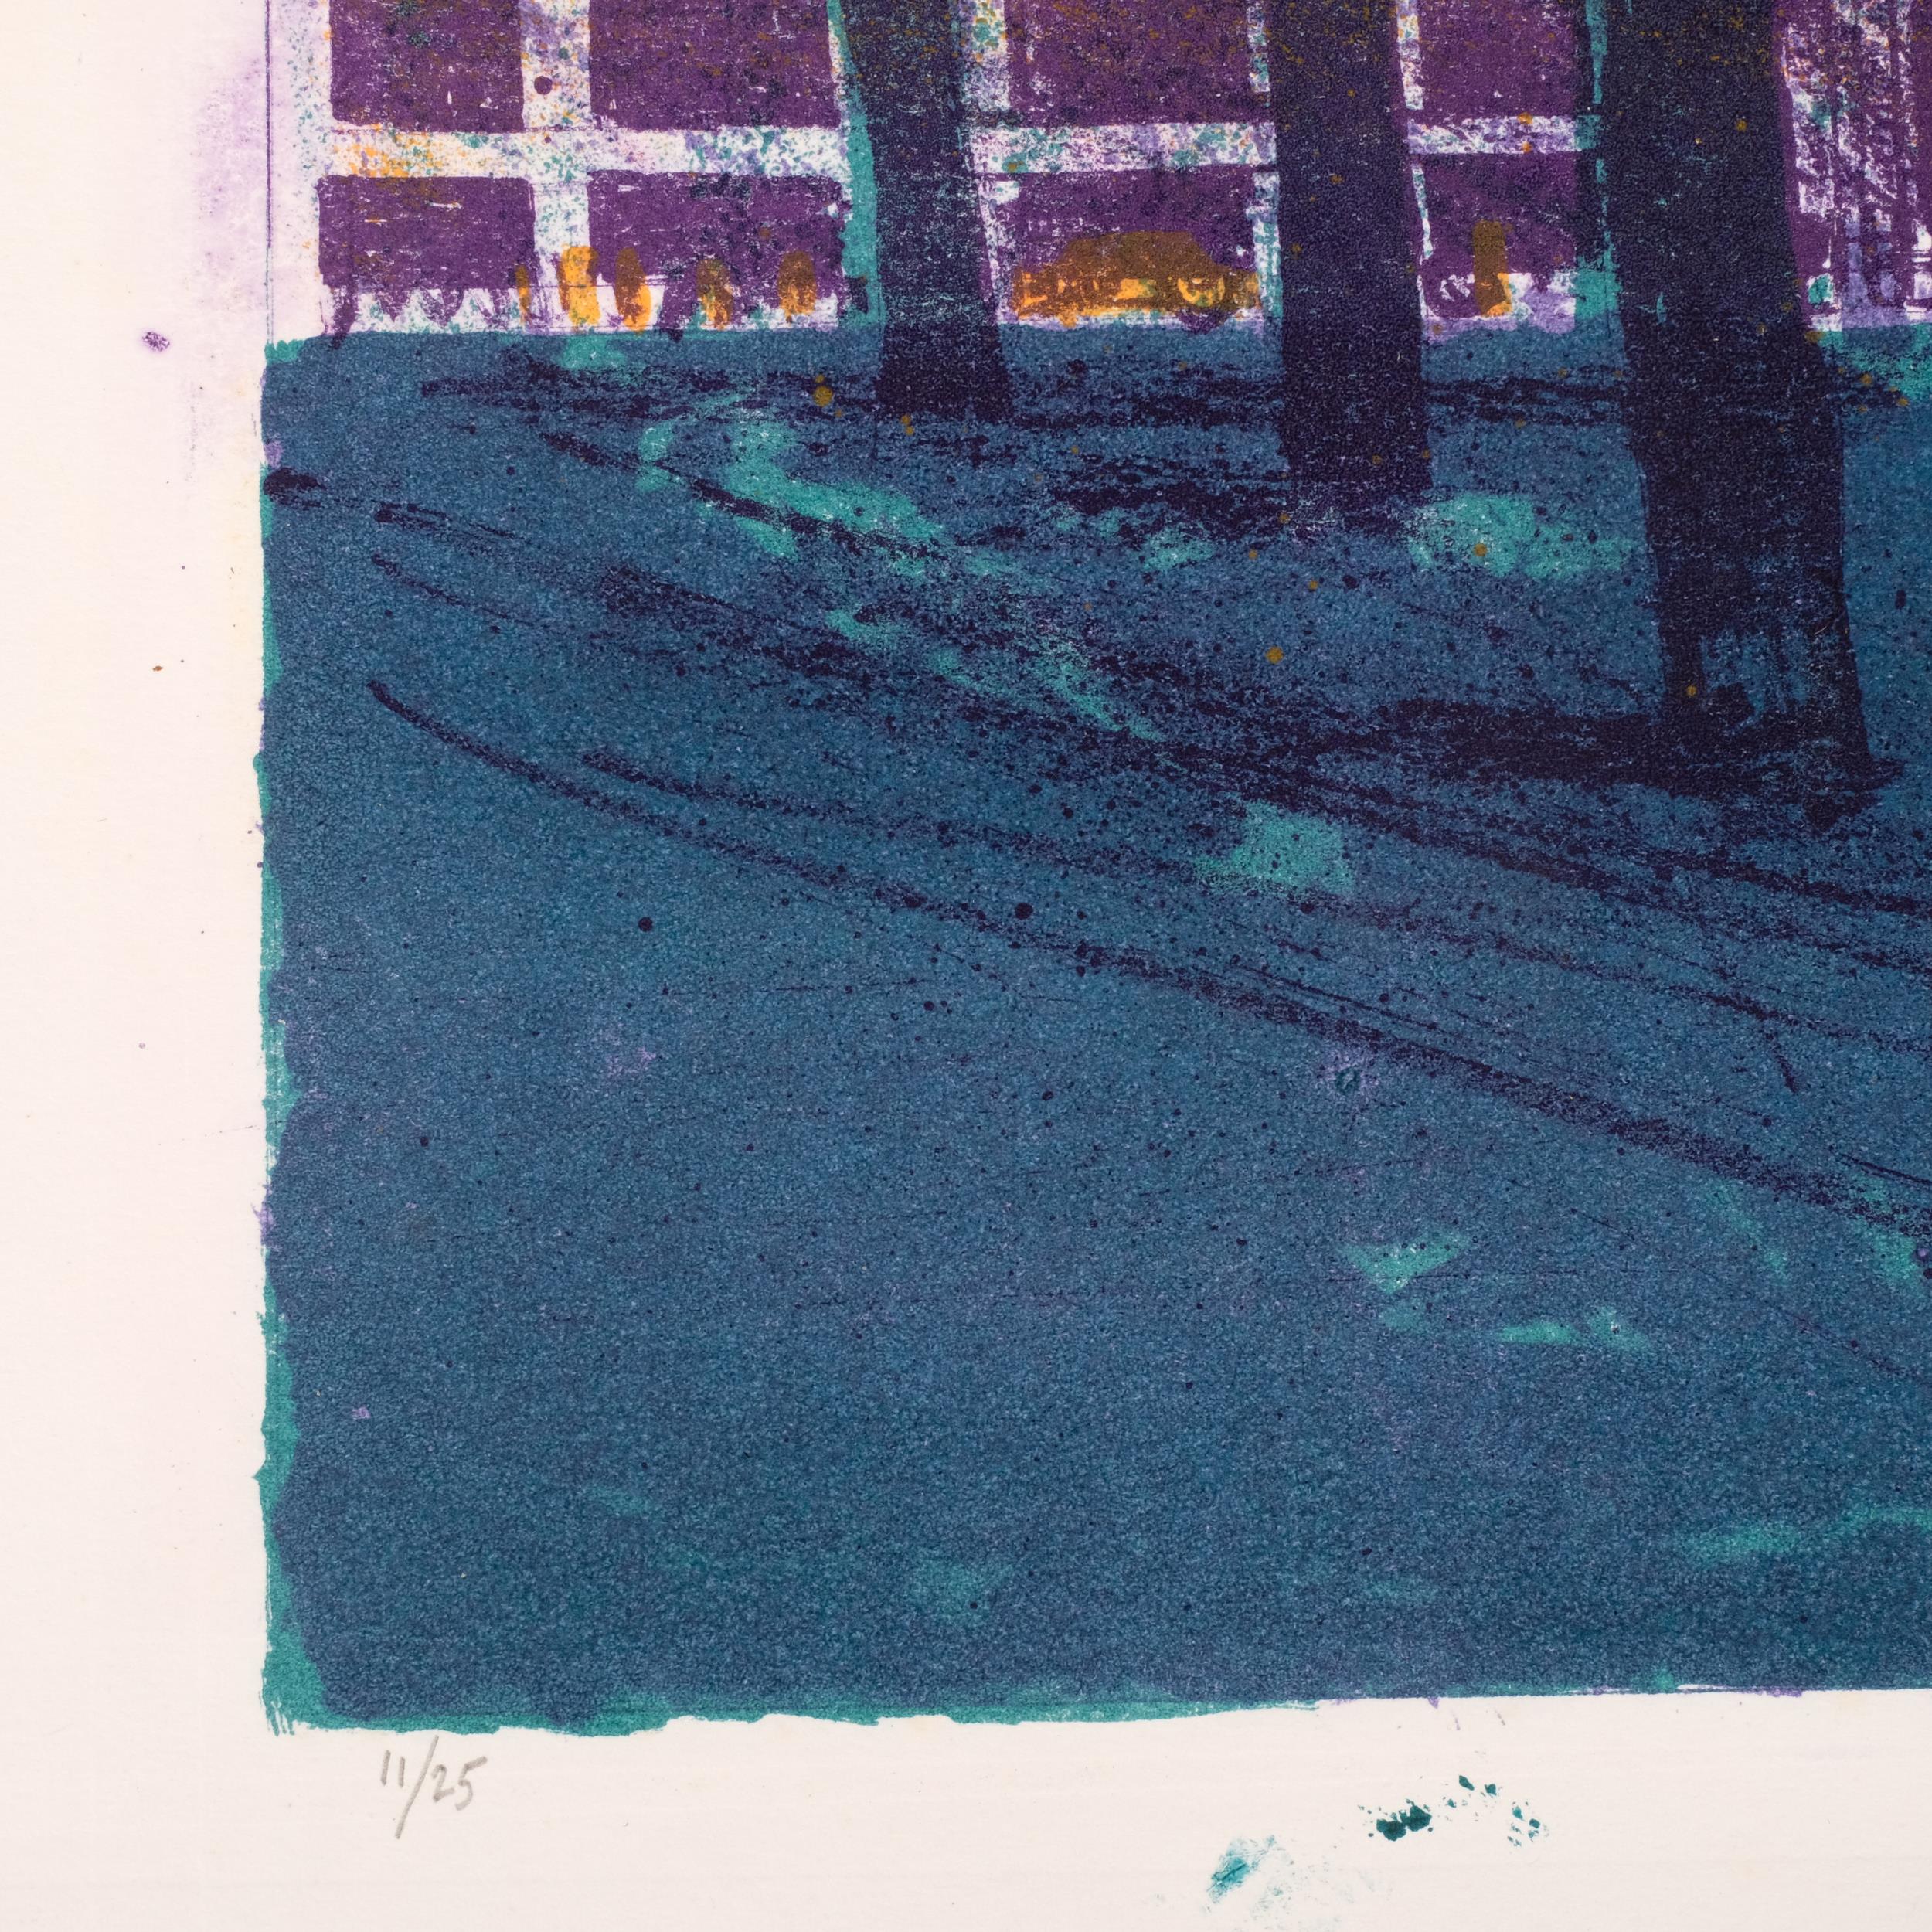 Robert Tavener, American Embassy, Grosvenor Square, lithograph, 1968, signed in pencil, no. 11/25, - Image 4 of 4